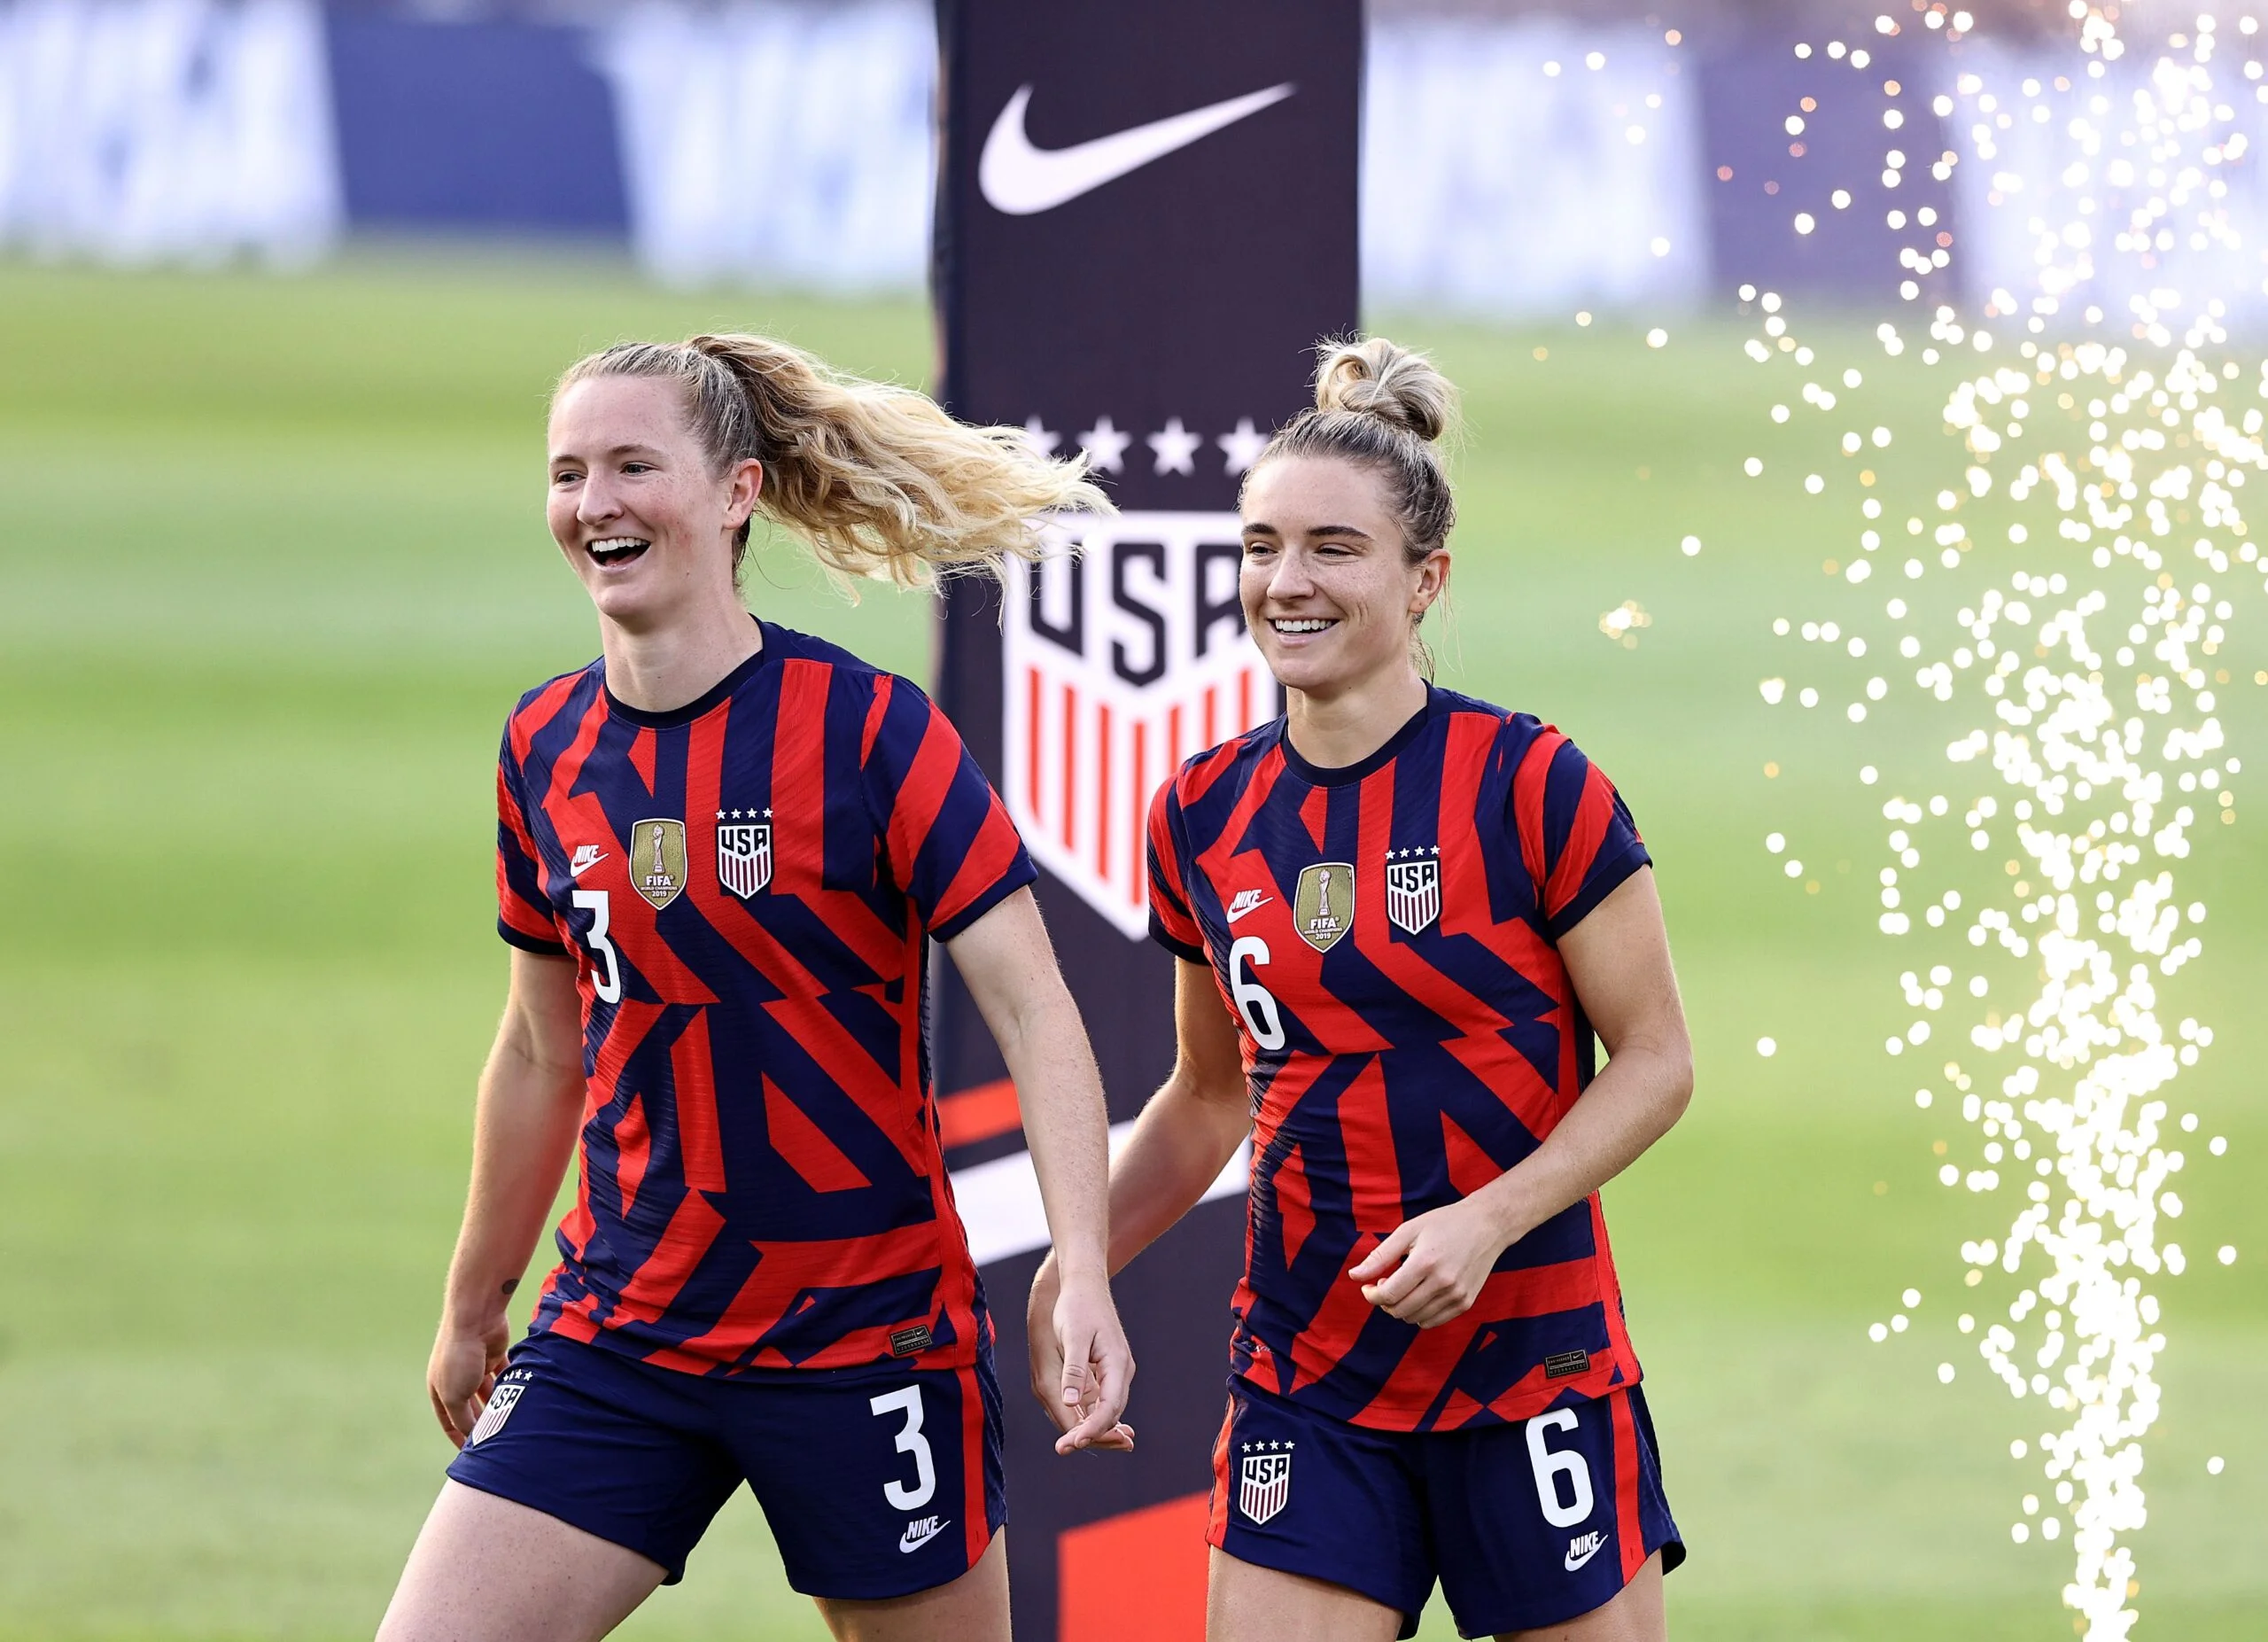 Sam And Kristie Representing US Women's National Team 